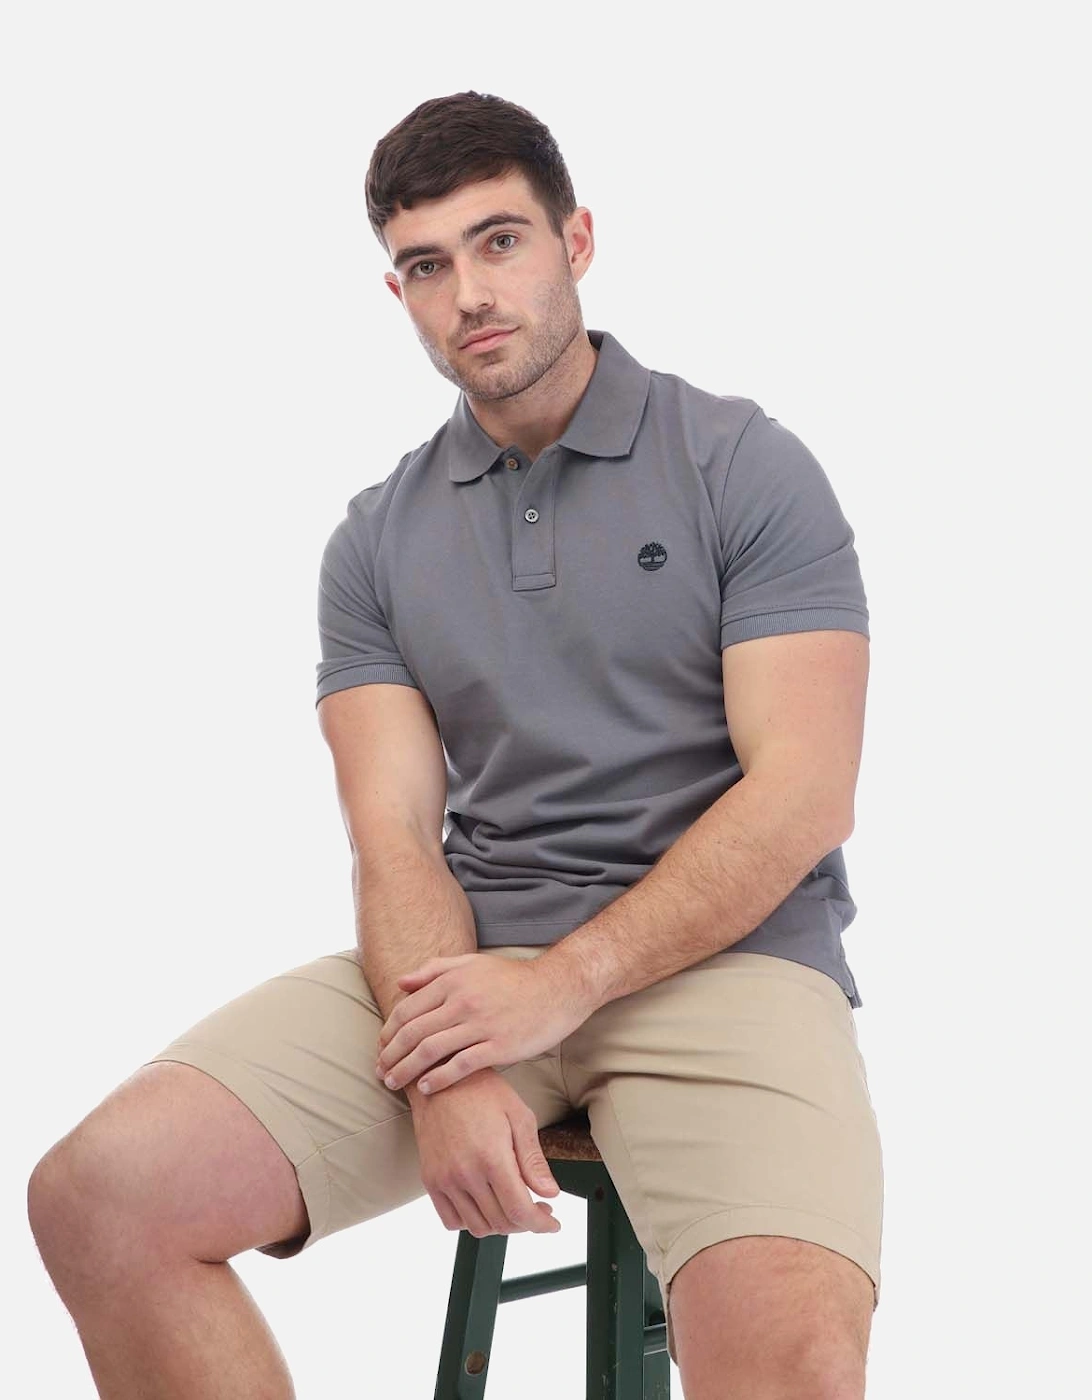 Mens Millers River Polo Shirt - Millers River Short Sleeve Polo